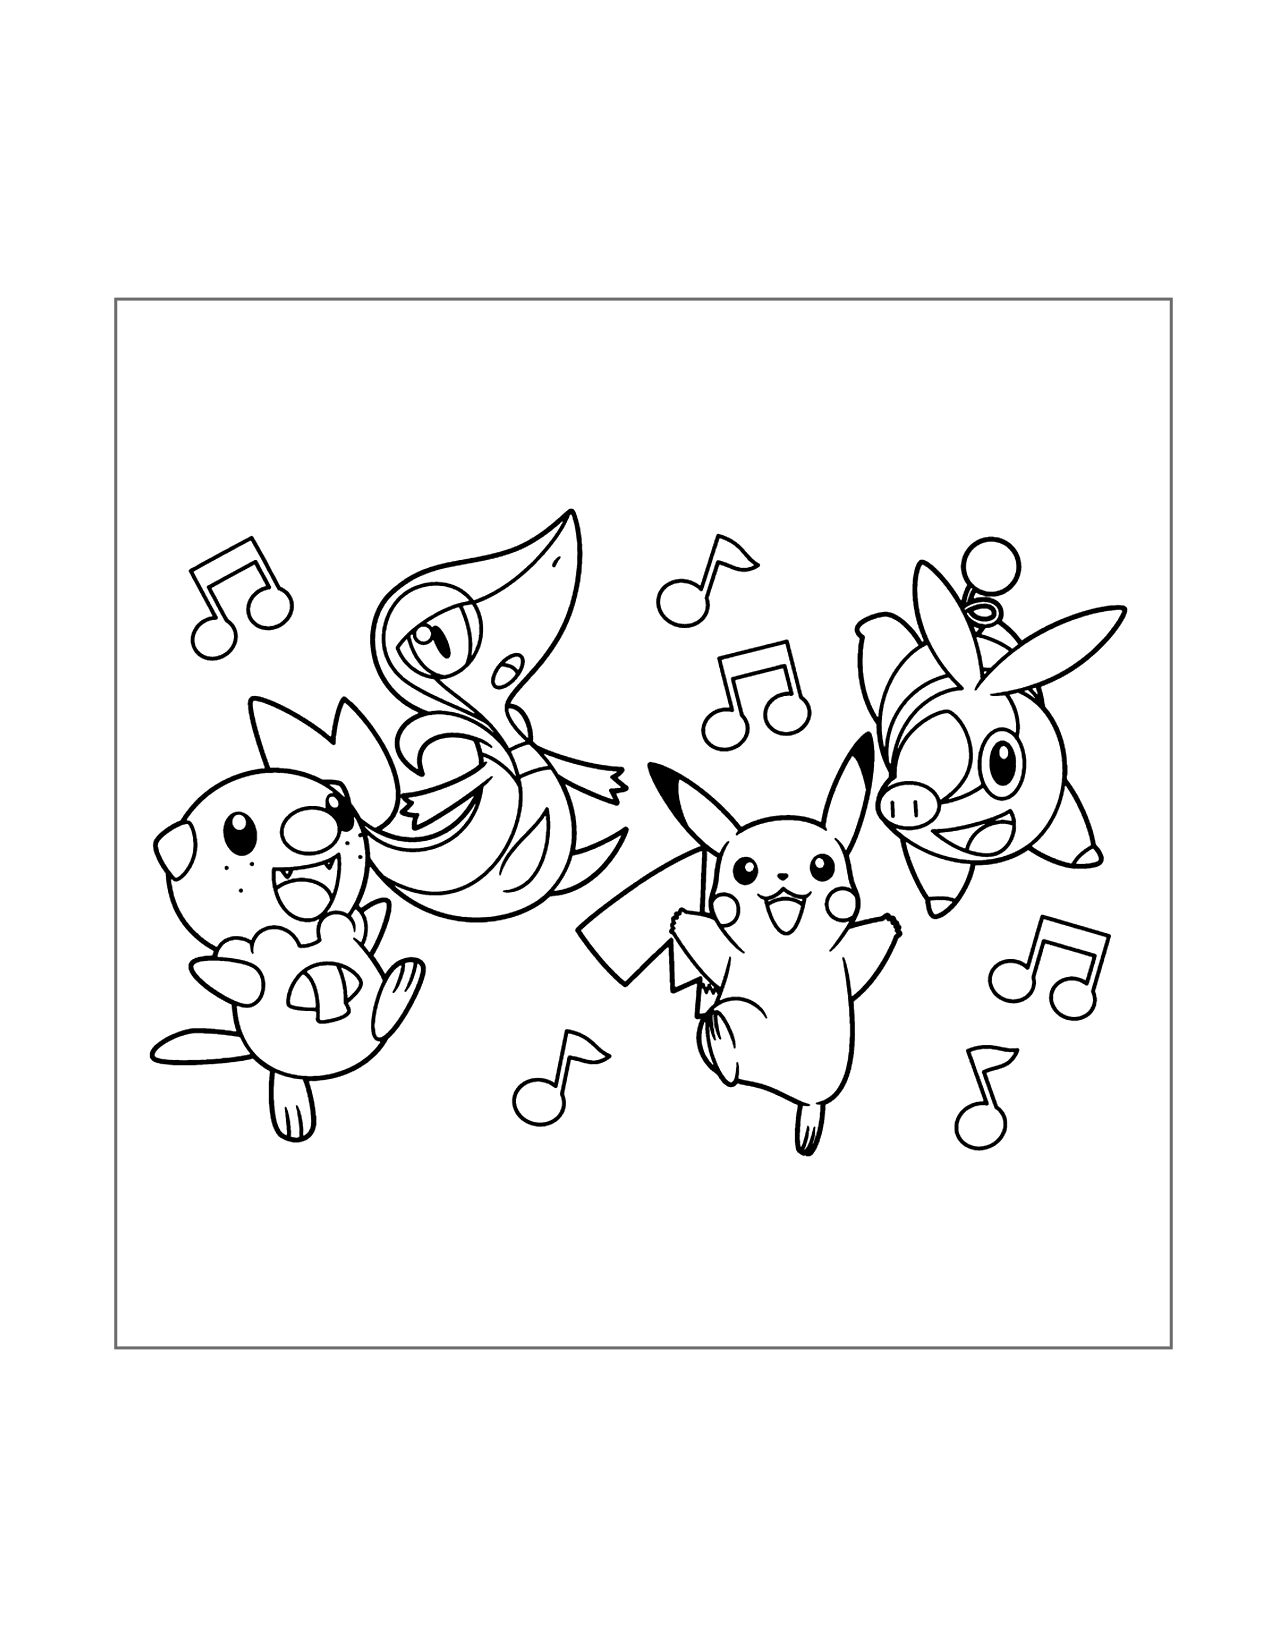 Dancing Pikachu And Pokemon Coloring Page